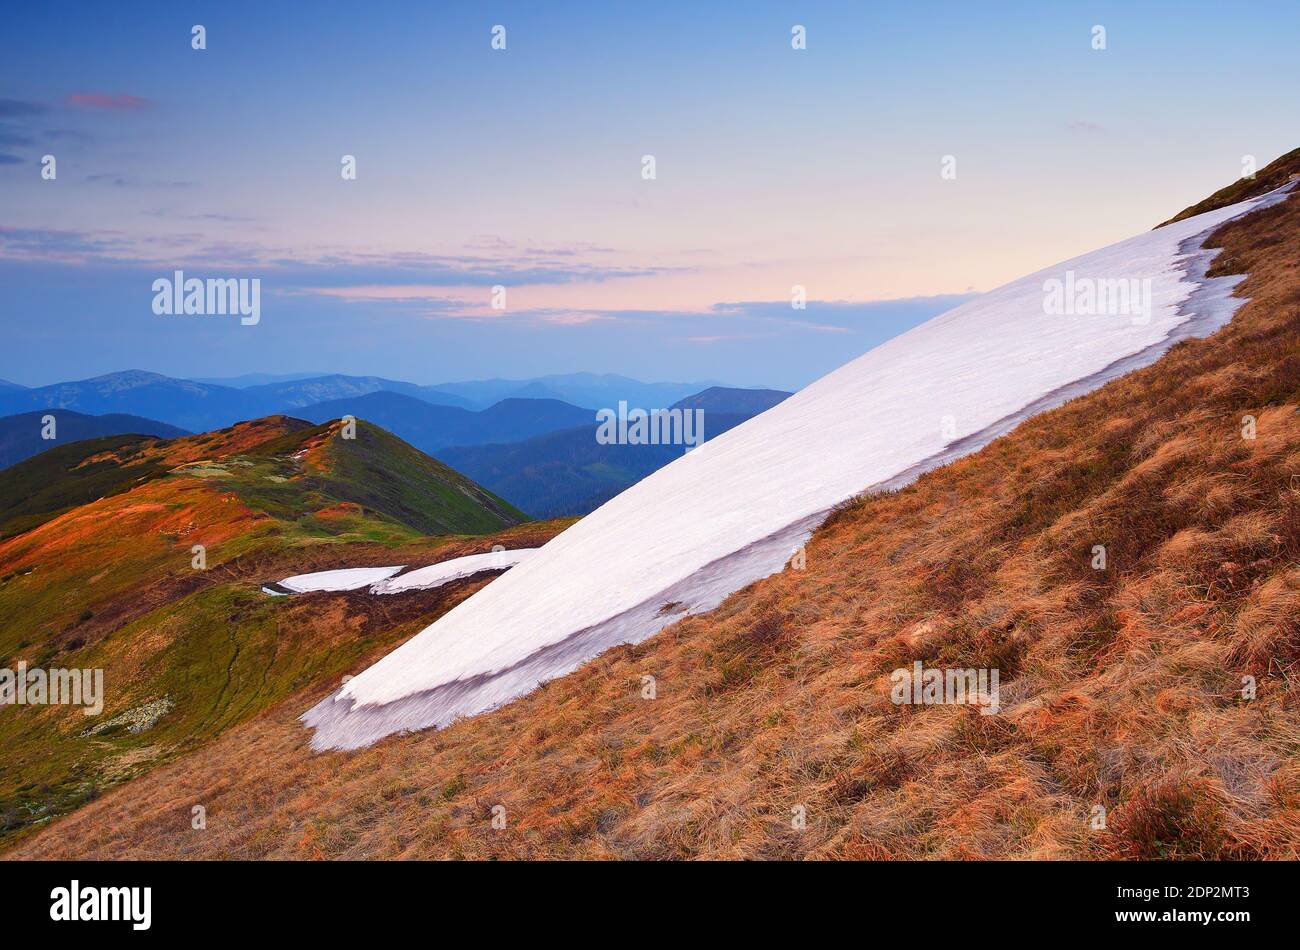 Spring landscape in the mountains. Snowfield on a mountain slope Stock Photo